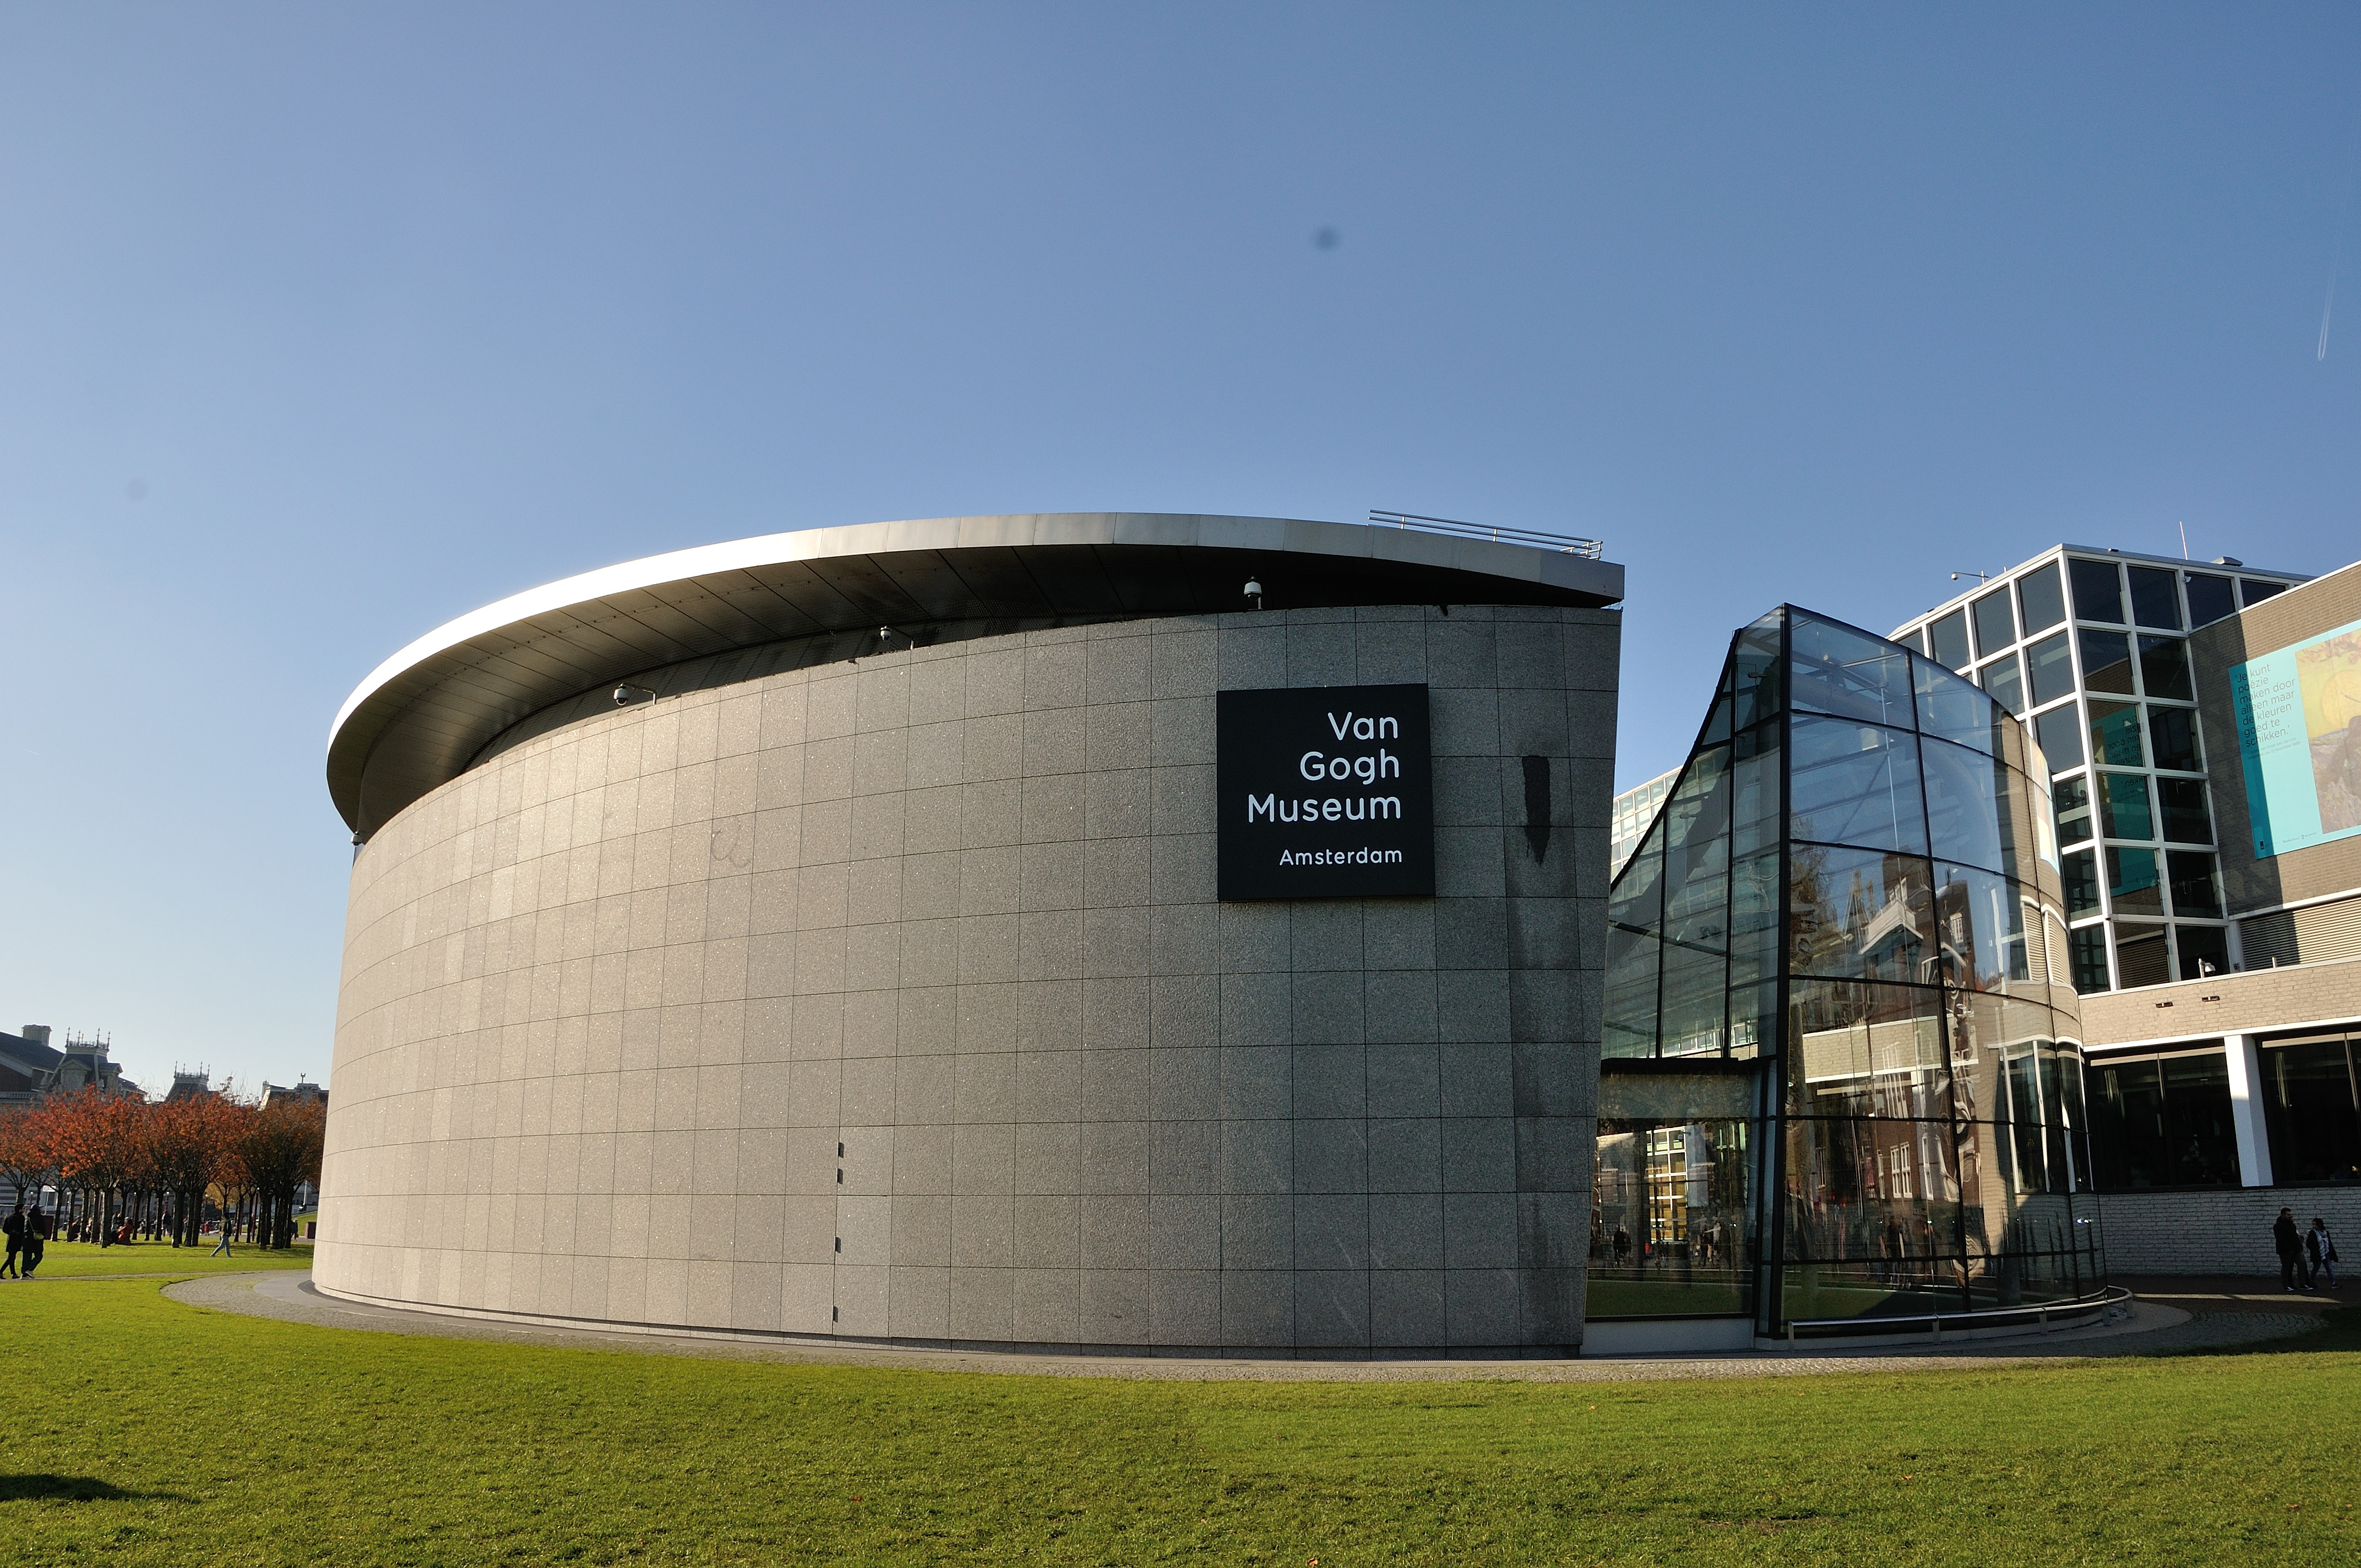 Van Gogh Museum - Opening hours and location in Amsterdam